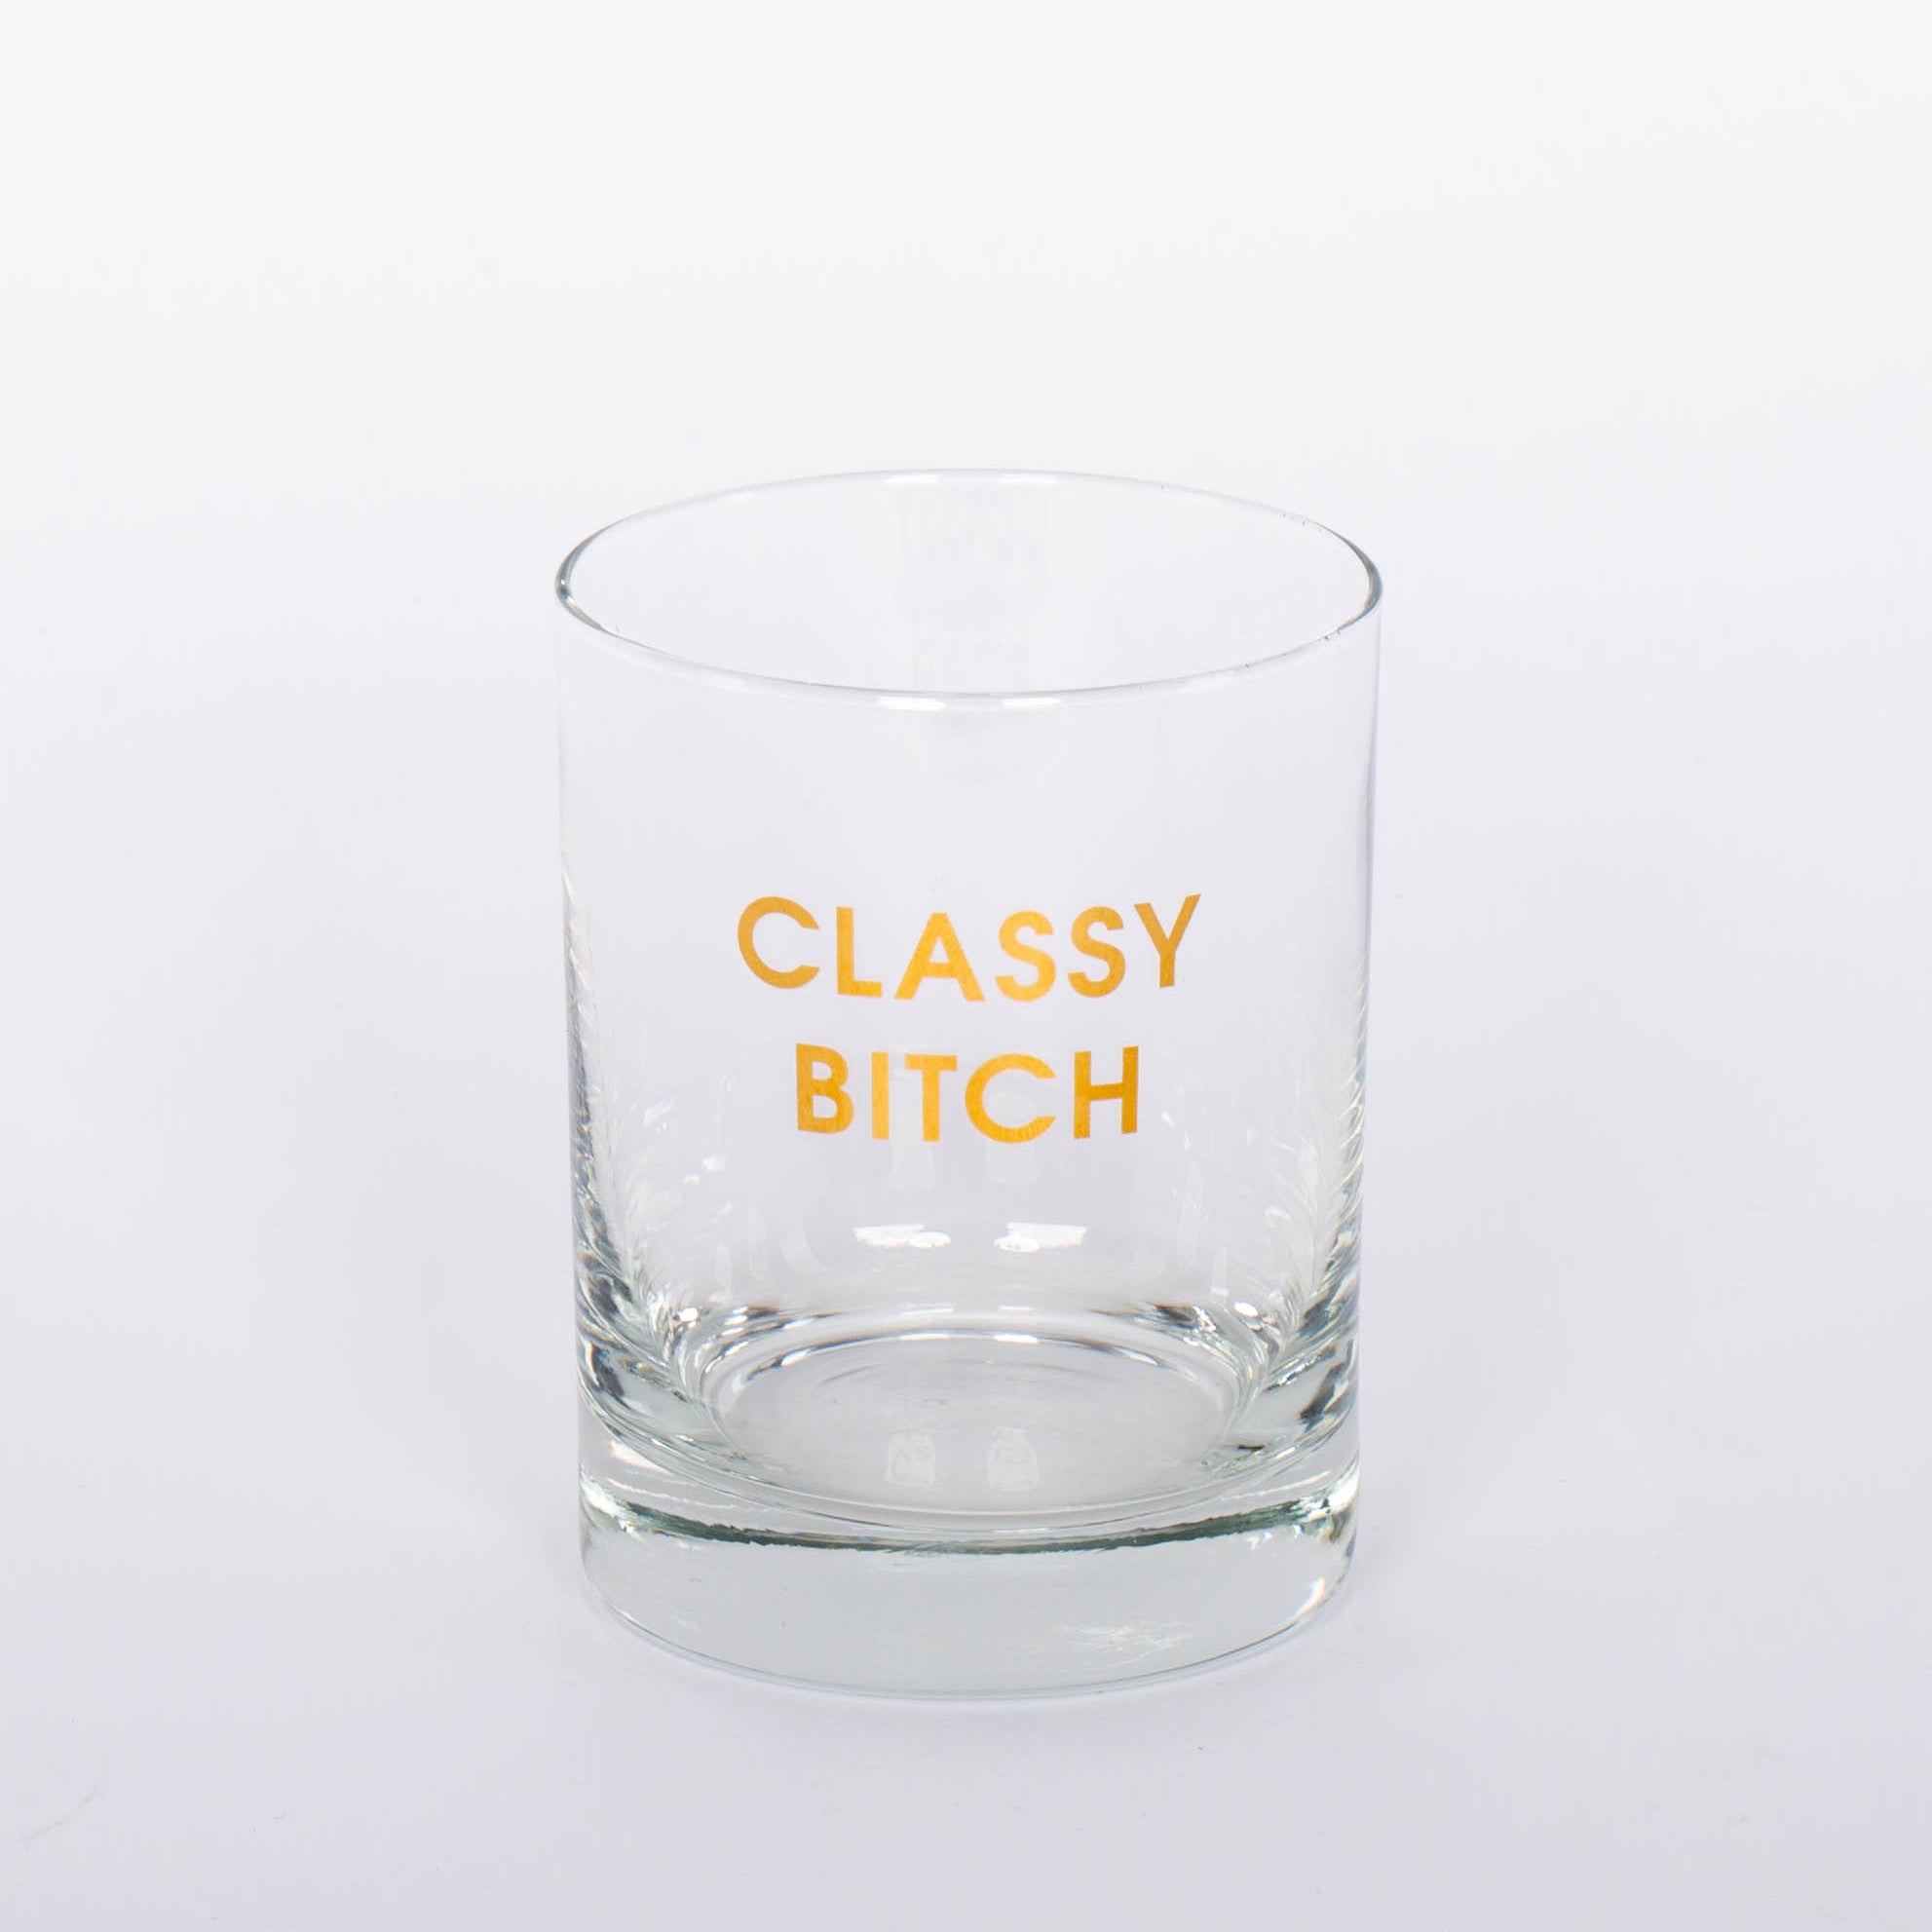 Crush your cocktail in style with our "Classy Bitch" gold foil rocks glass.